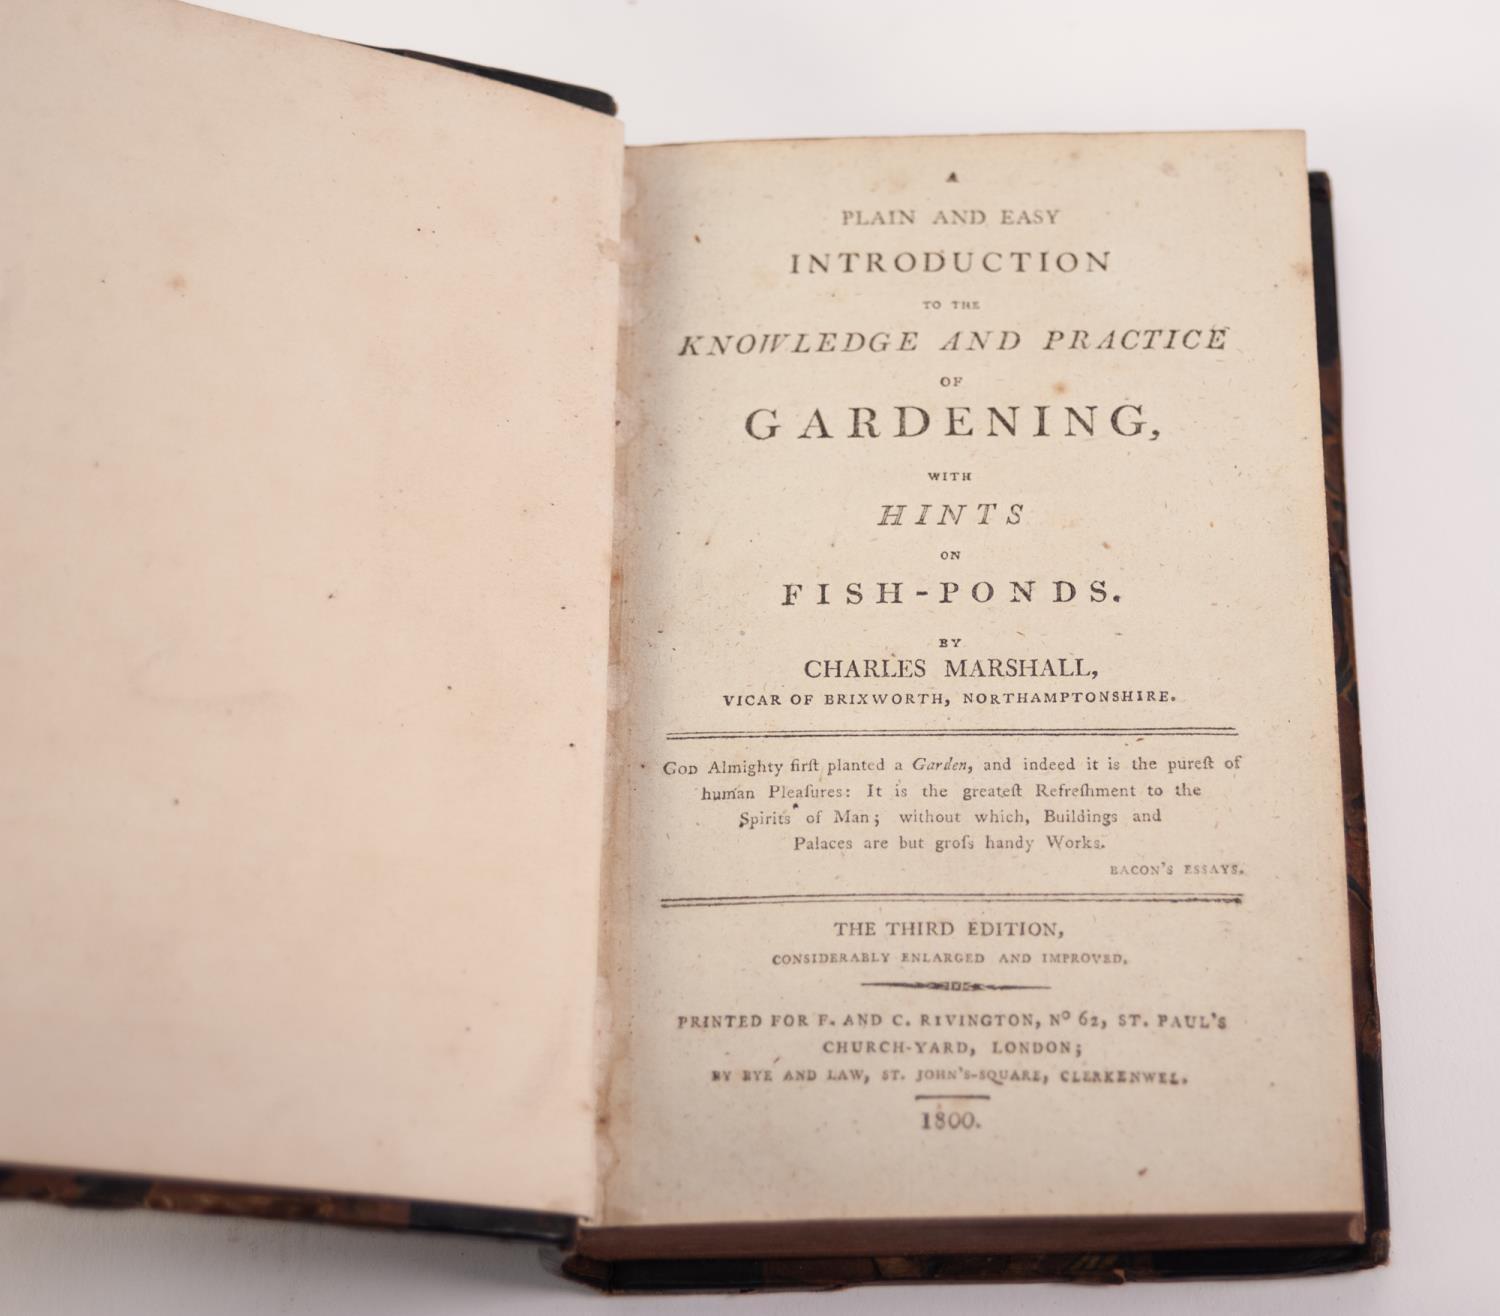 CHARLES MARSHALL - PLAIN AND EASY INTRODUCTION TO THE KNOWLEDGE AND PRACTICE OF GARDENING, with - Image 2 of 3